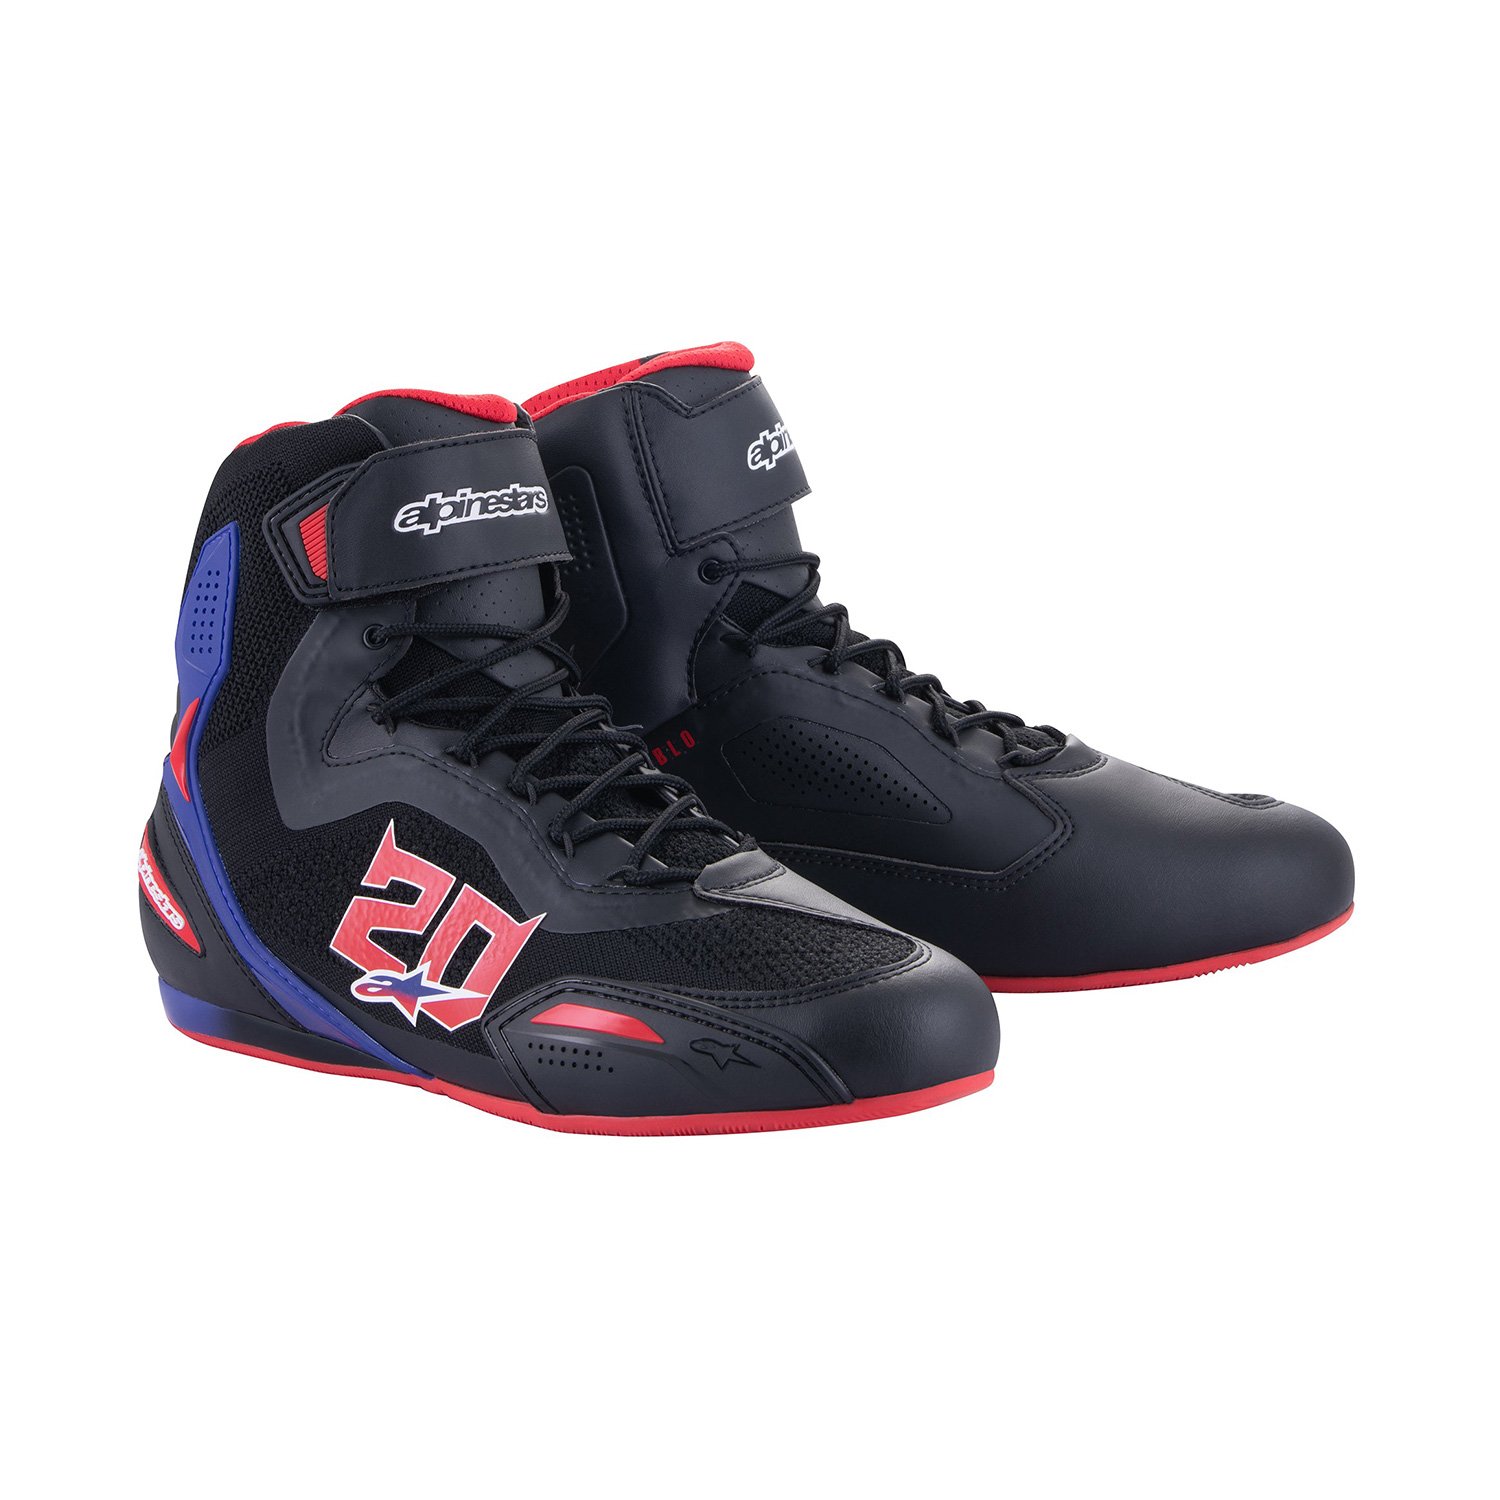 Image of EU Alpinestars FQ20 Faster-3 Rideknit Noir Bright Rouge Bleu Chaussures Taille US 85